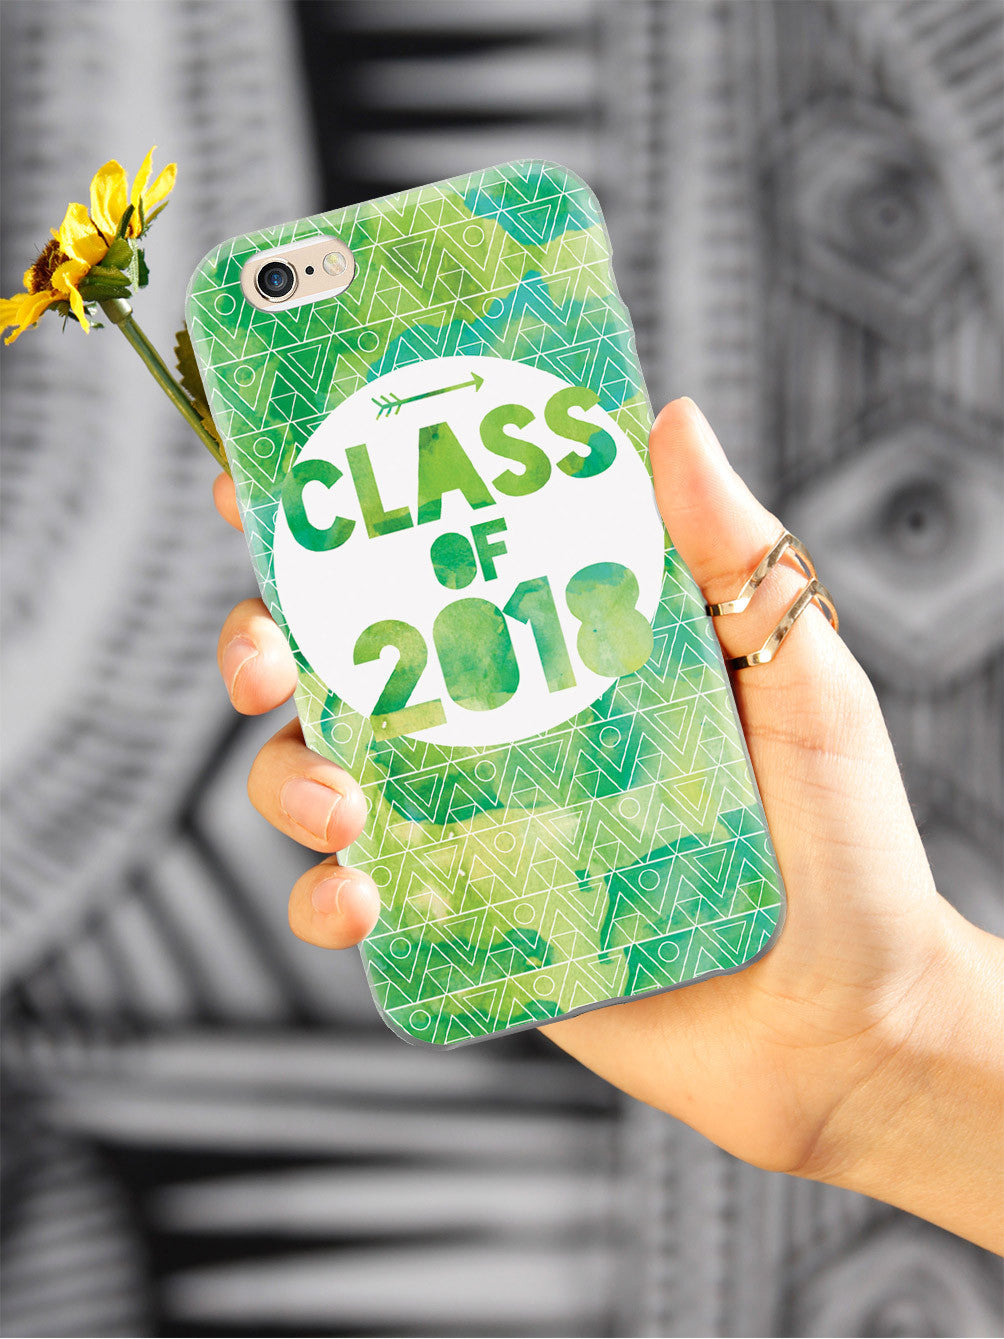 Class of 2018 - Green Watercolor Case